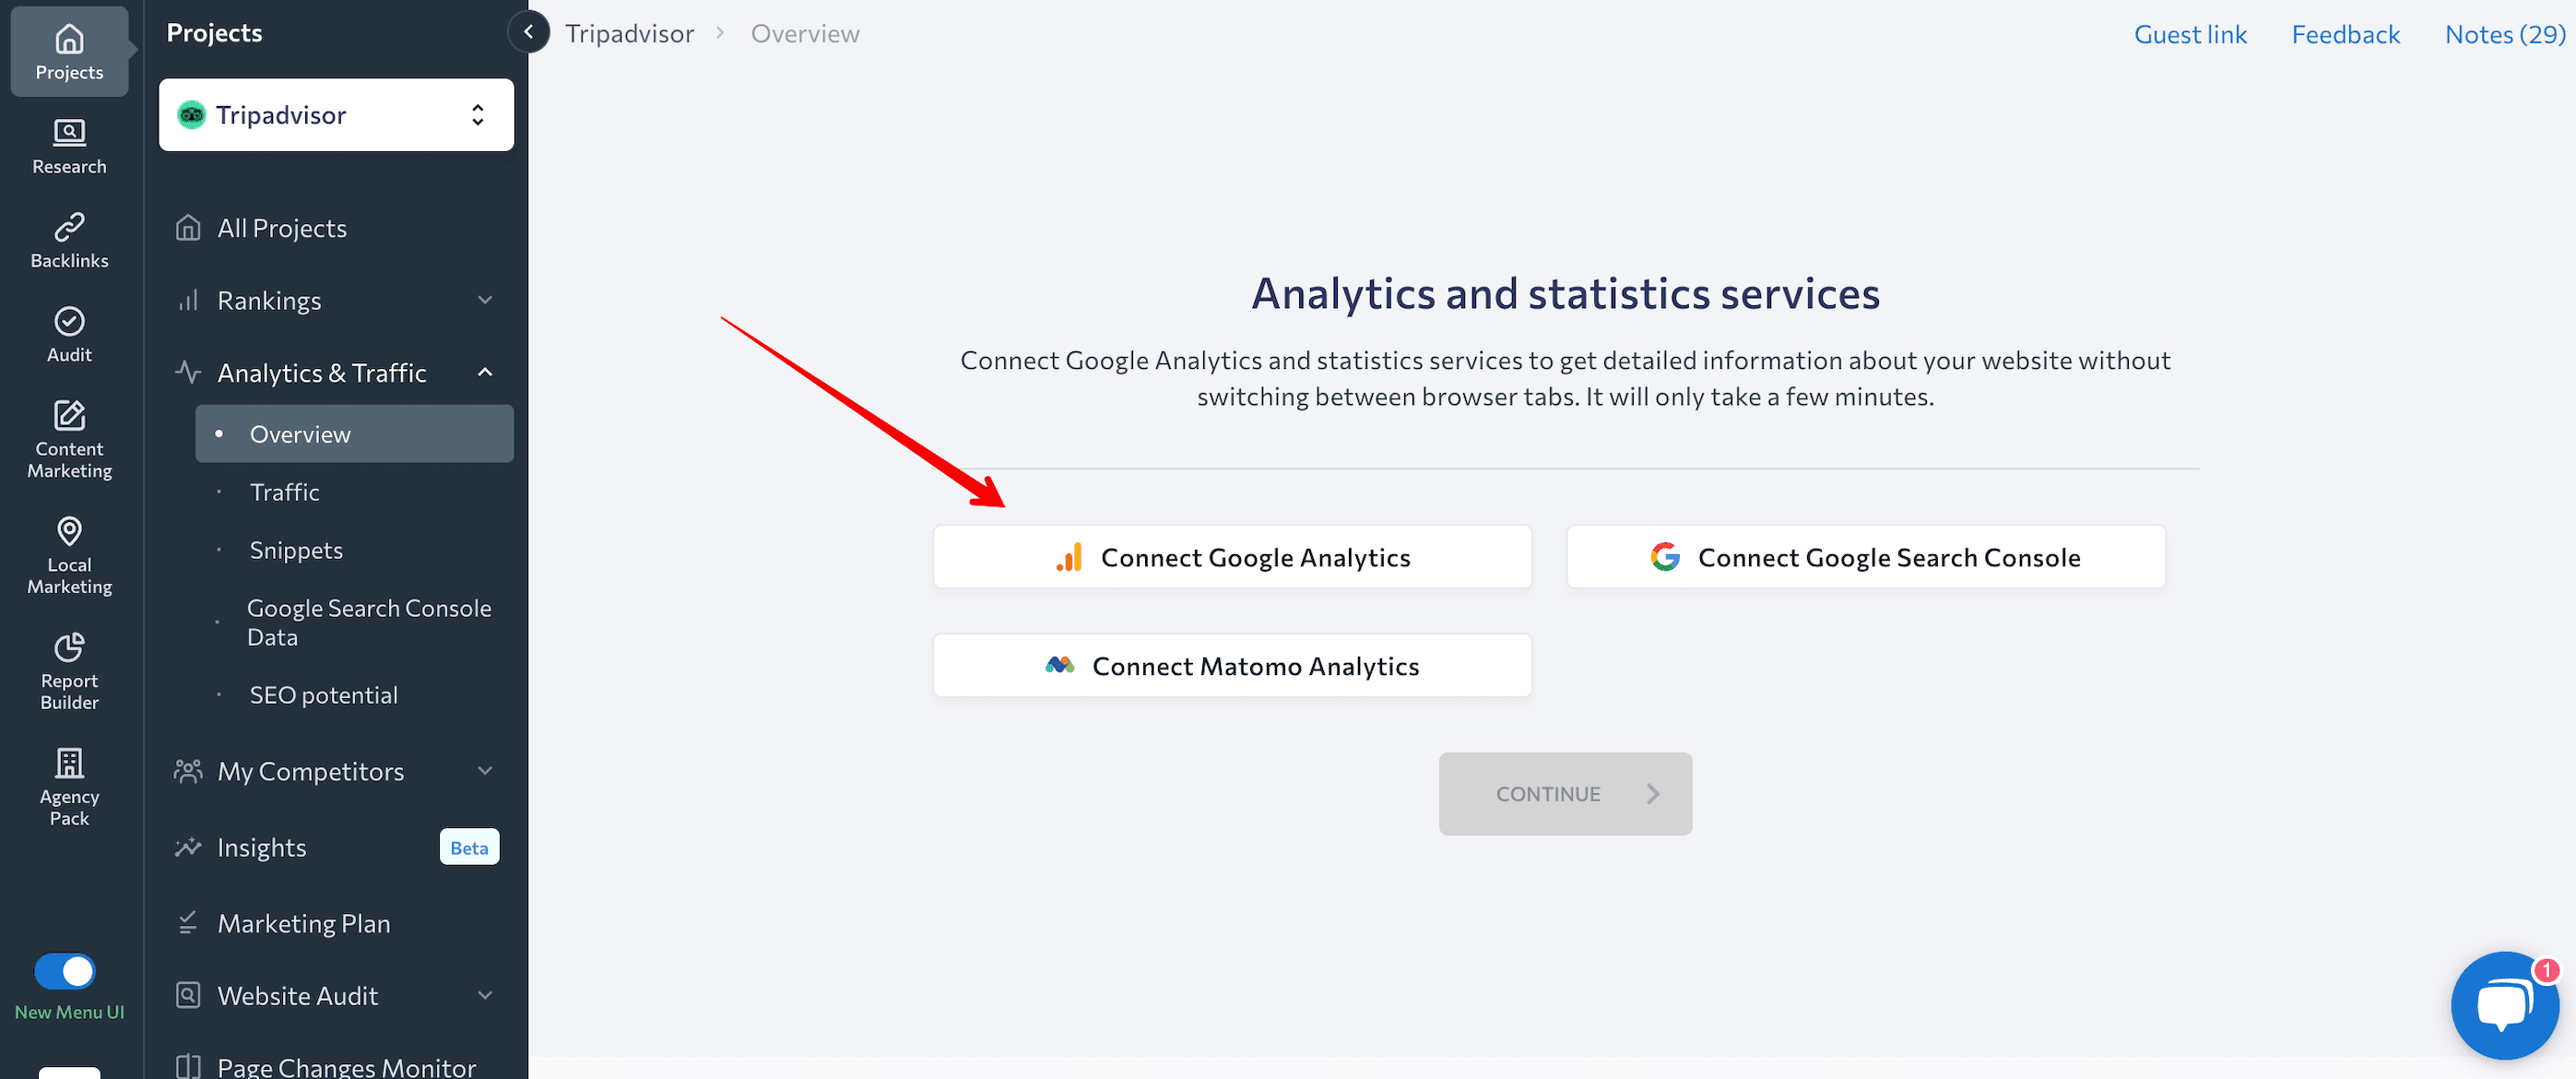 How to connect Google Search Console to SE Ranking